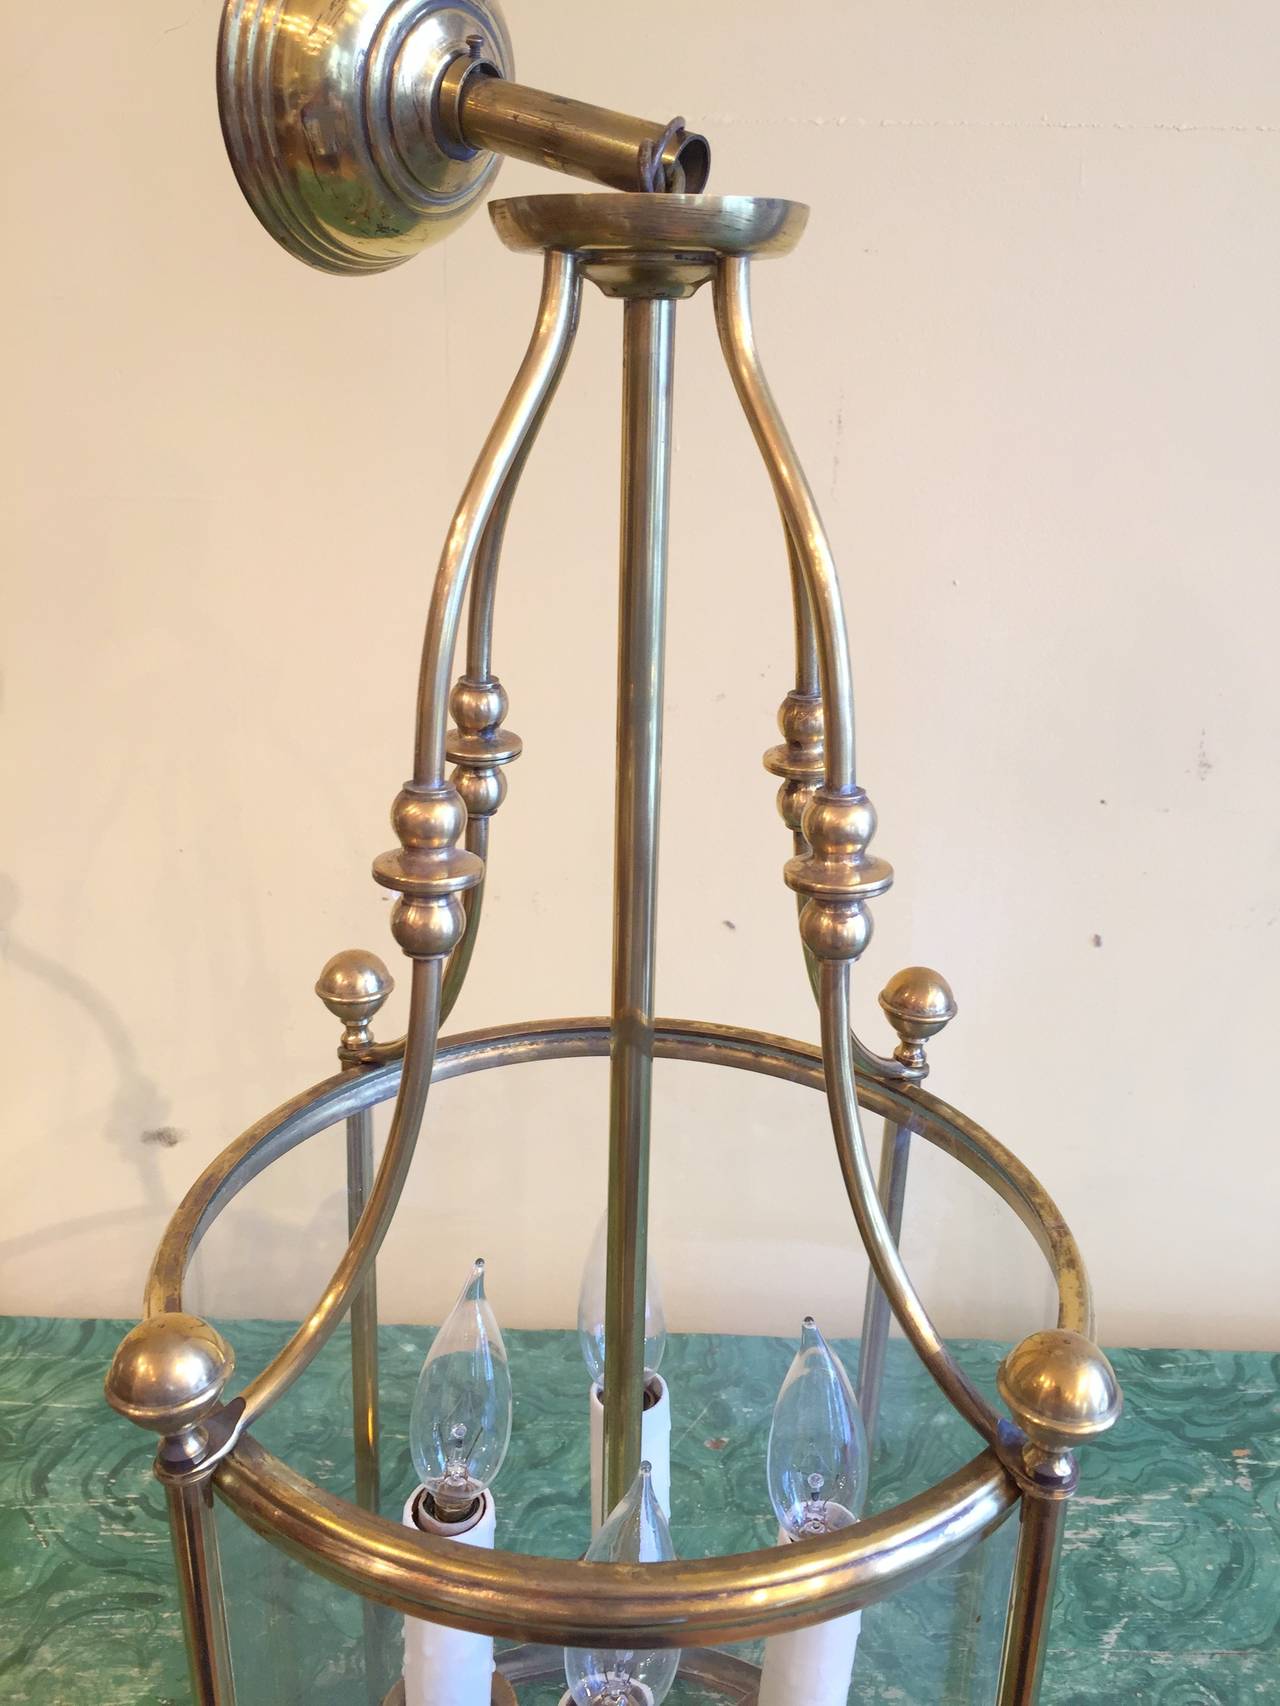 Vintage French Brass Circular Four-Light Lantern In Good Condition For Sale In New Orleans, LA